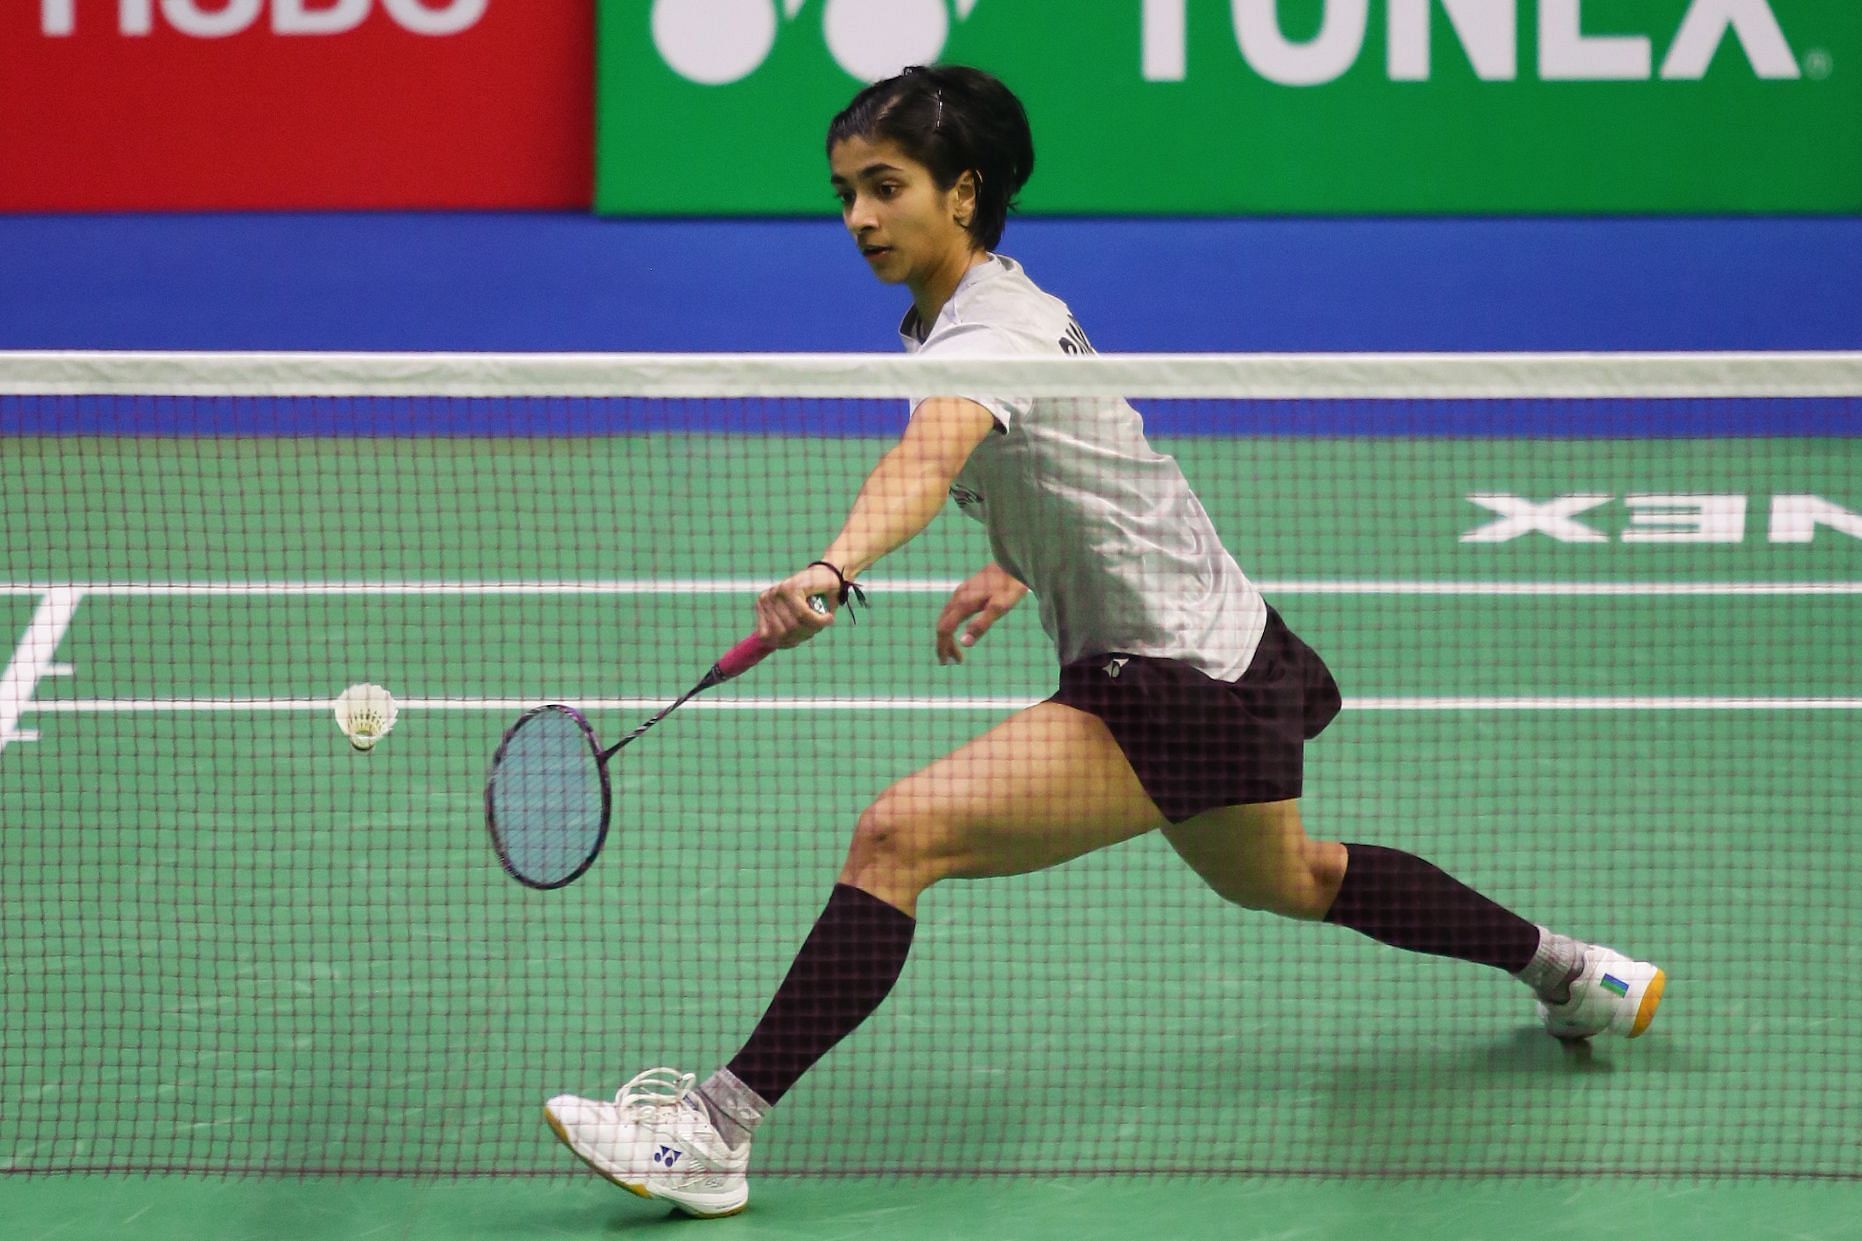 Nagpuir shuttler Malvika Bansod tried hard but could not stop top seed PV Sindhu in the final. (Picture: BAI)